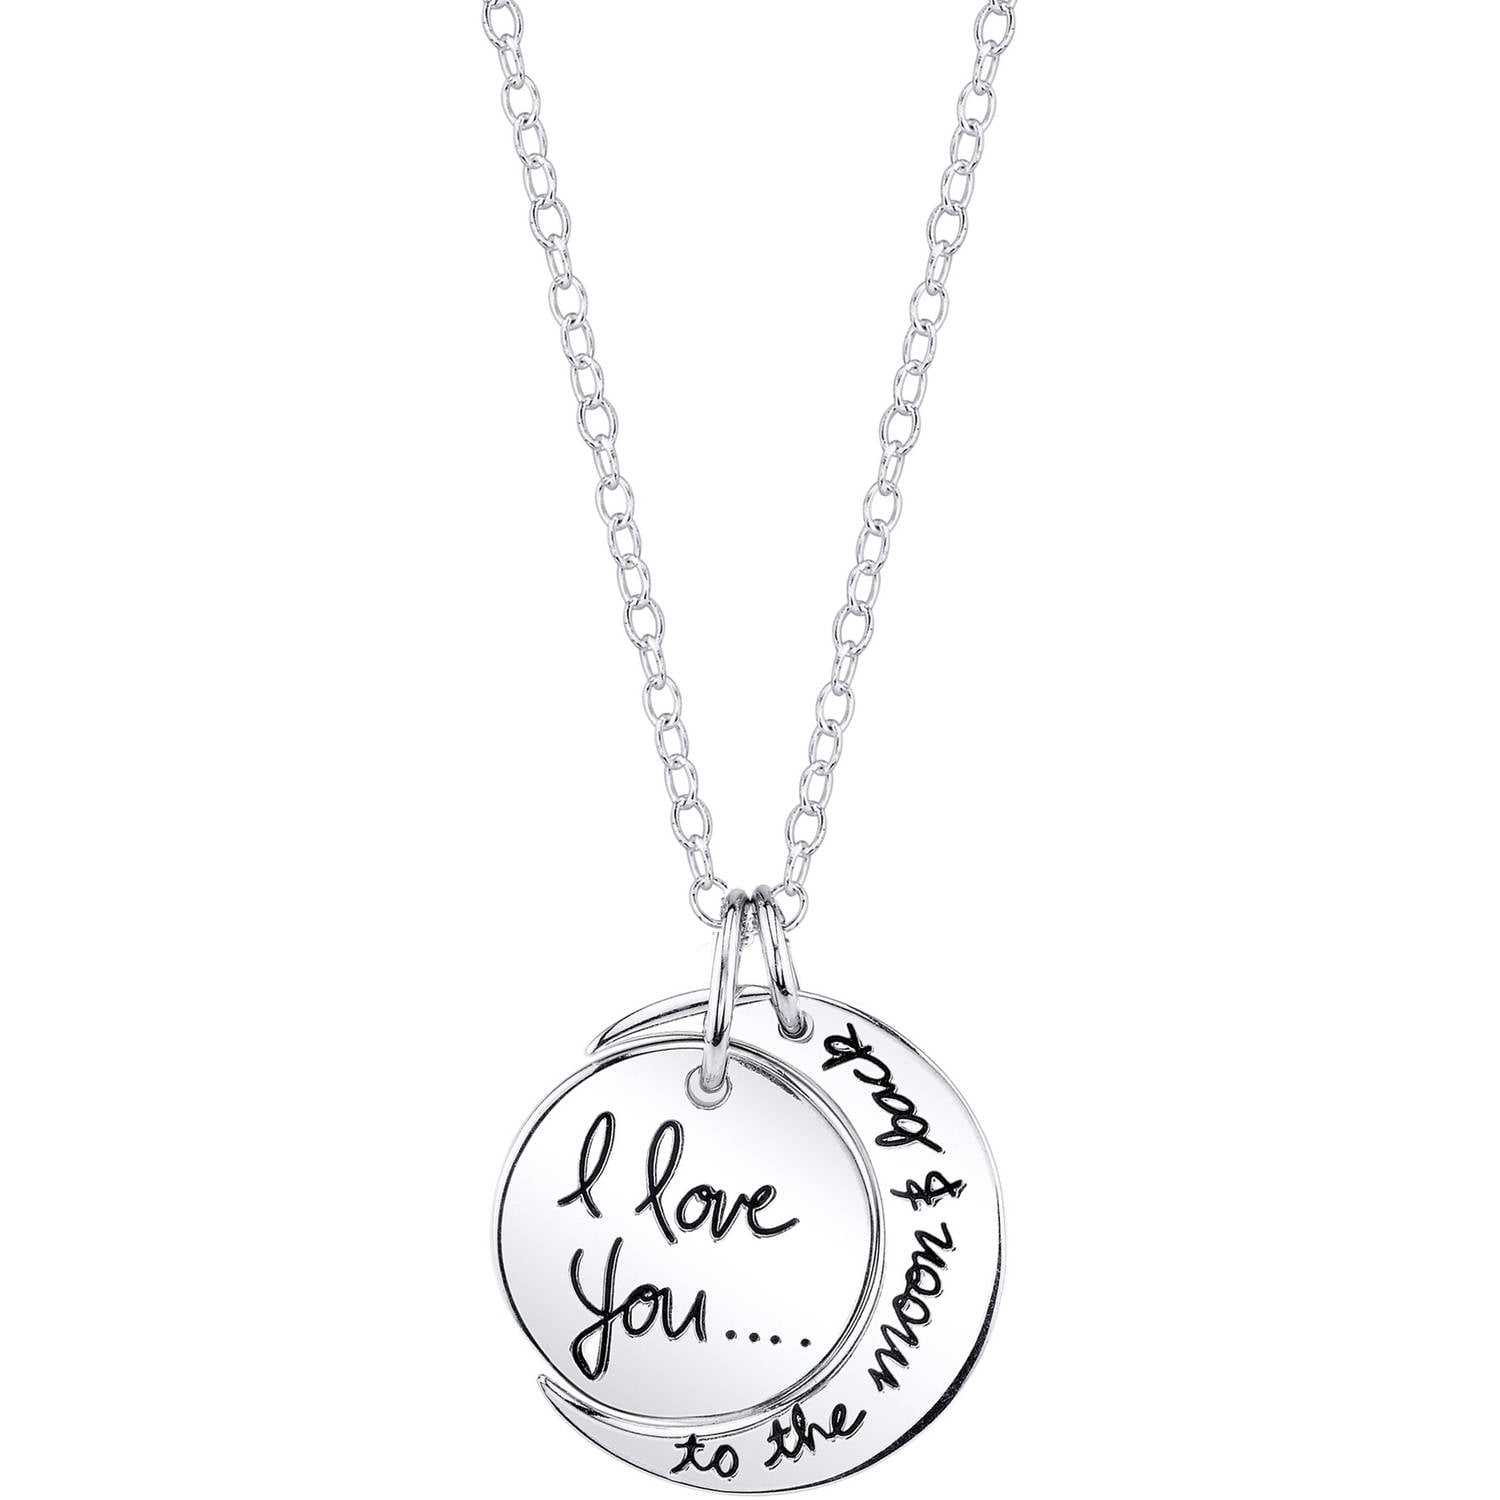 Honolulu Jewelry Company Sterling Silver I Love You 2 The Moon & Back Moon with Hanging CZ Heart Necklace Pendant and 18 Box Chain 